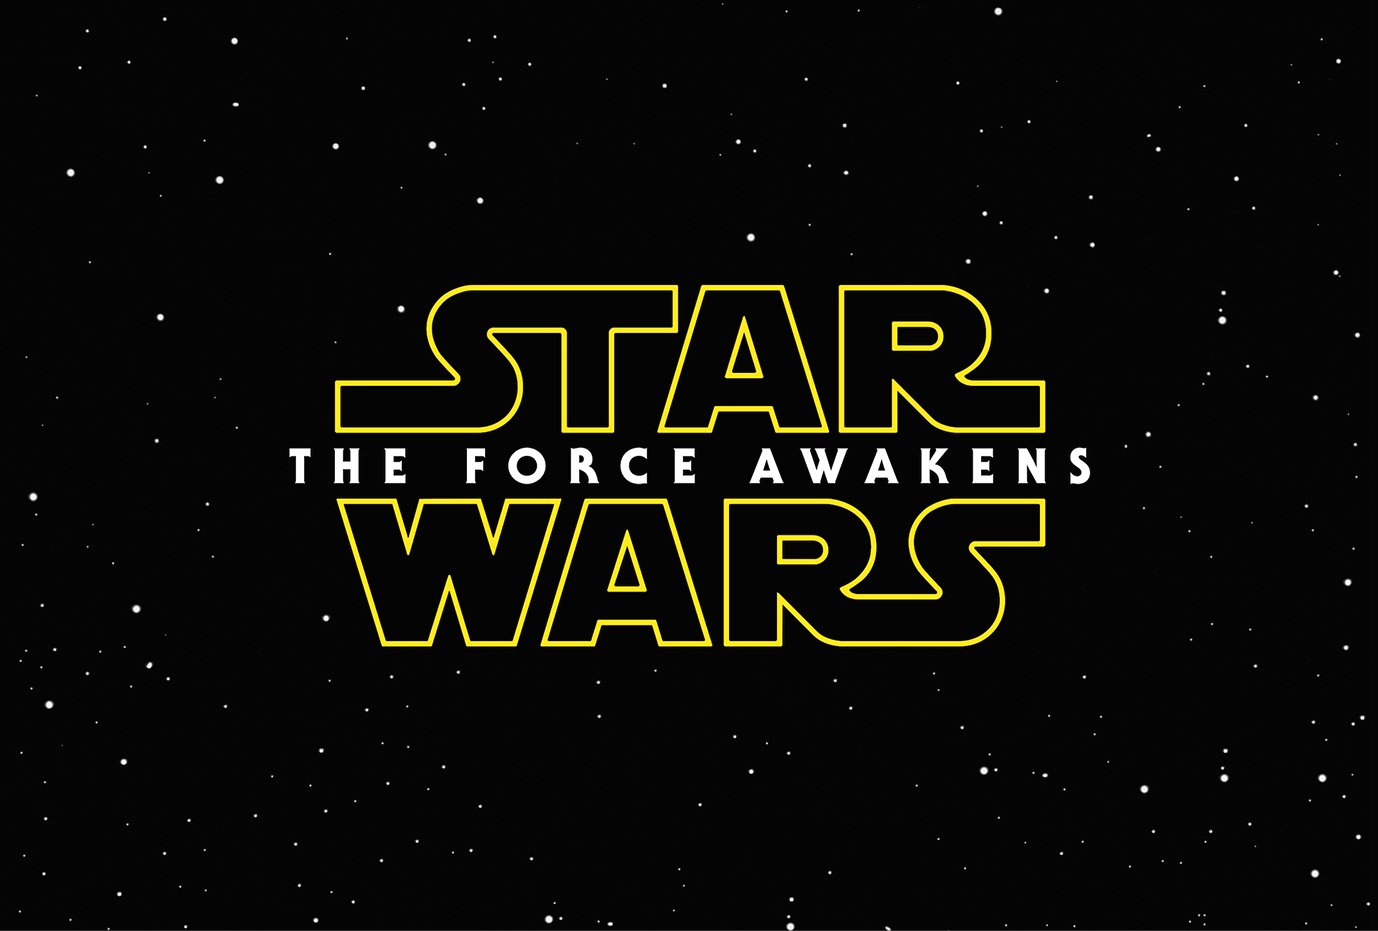 Star Wars: The Force Awakens, título